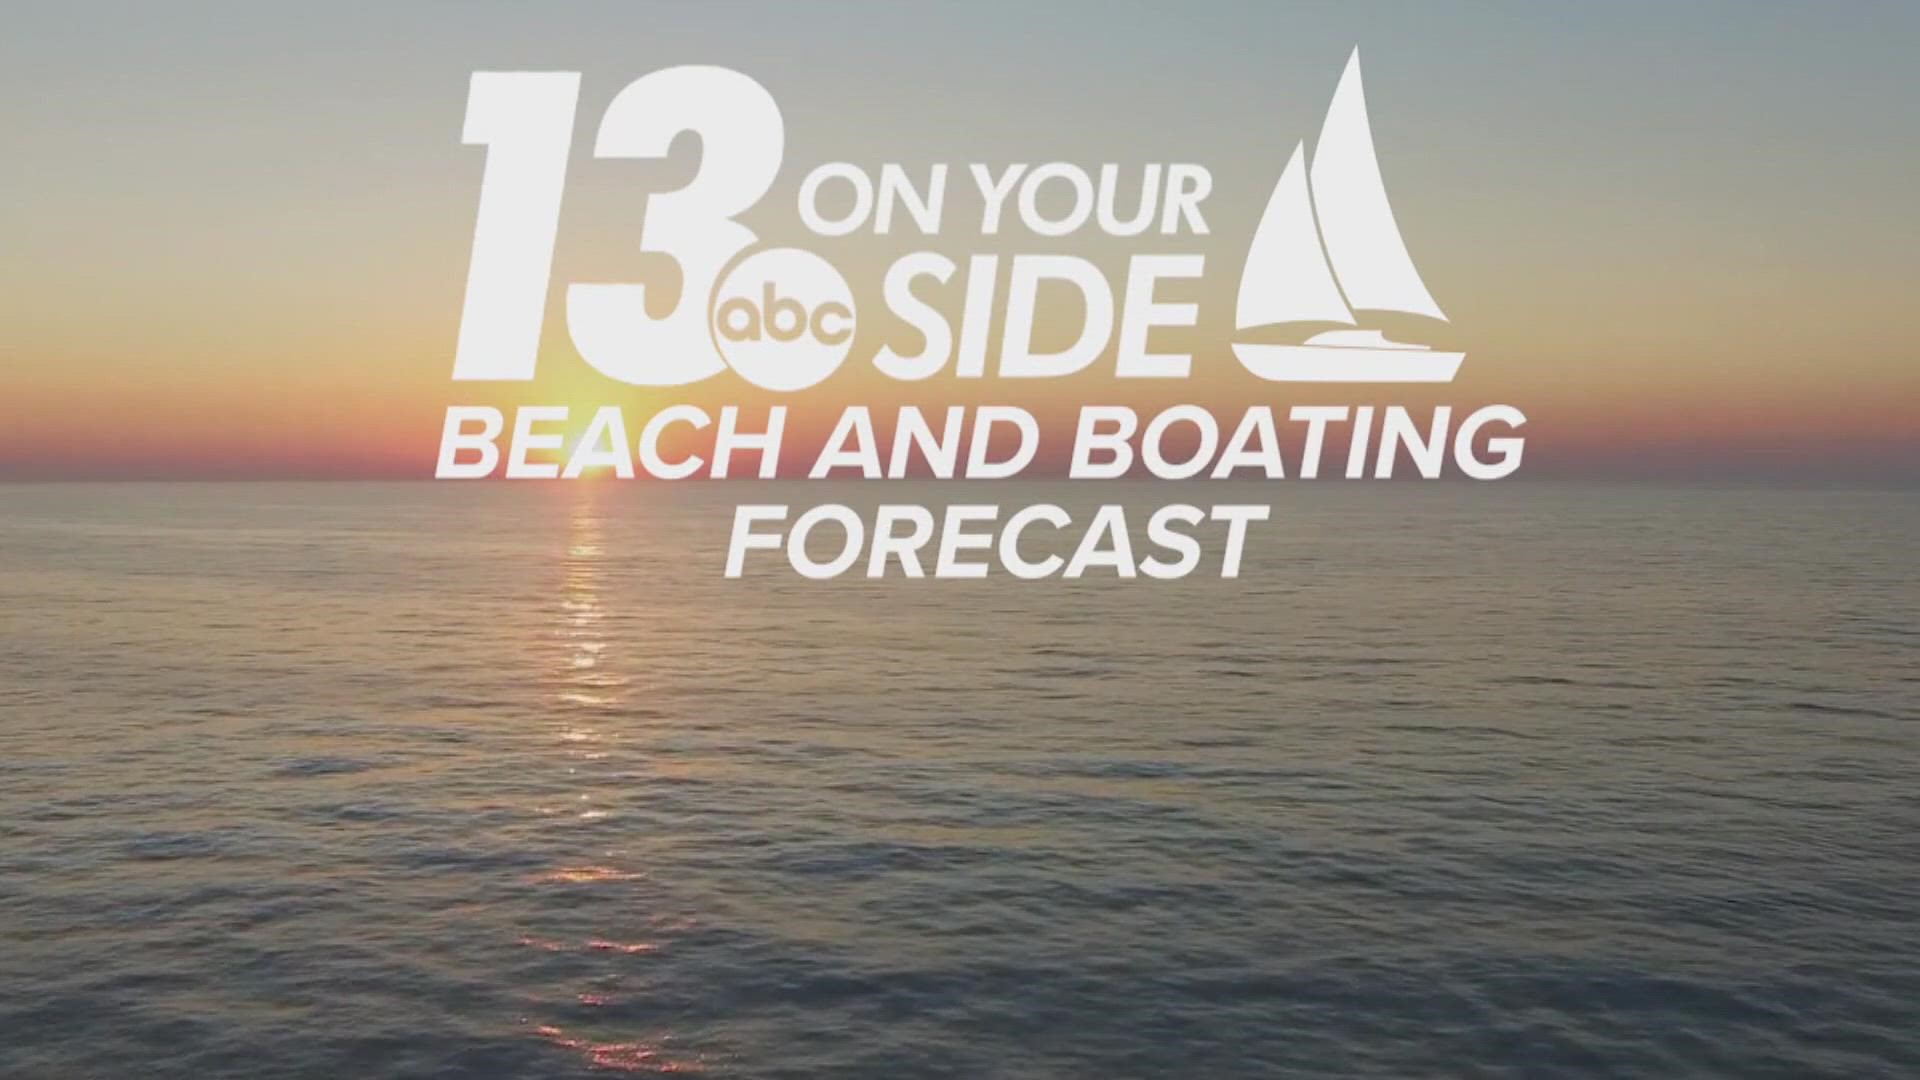 Meteorologist Michael Behrens has your West Michigan Beach and Boating forecast for Monday 6/27/2022.